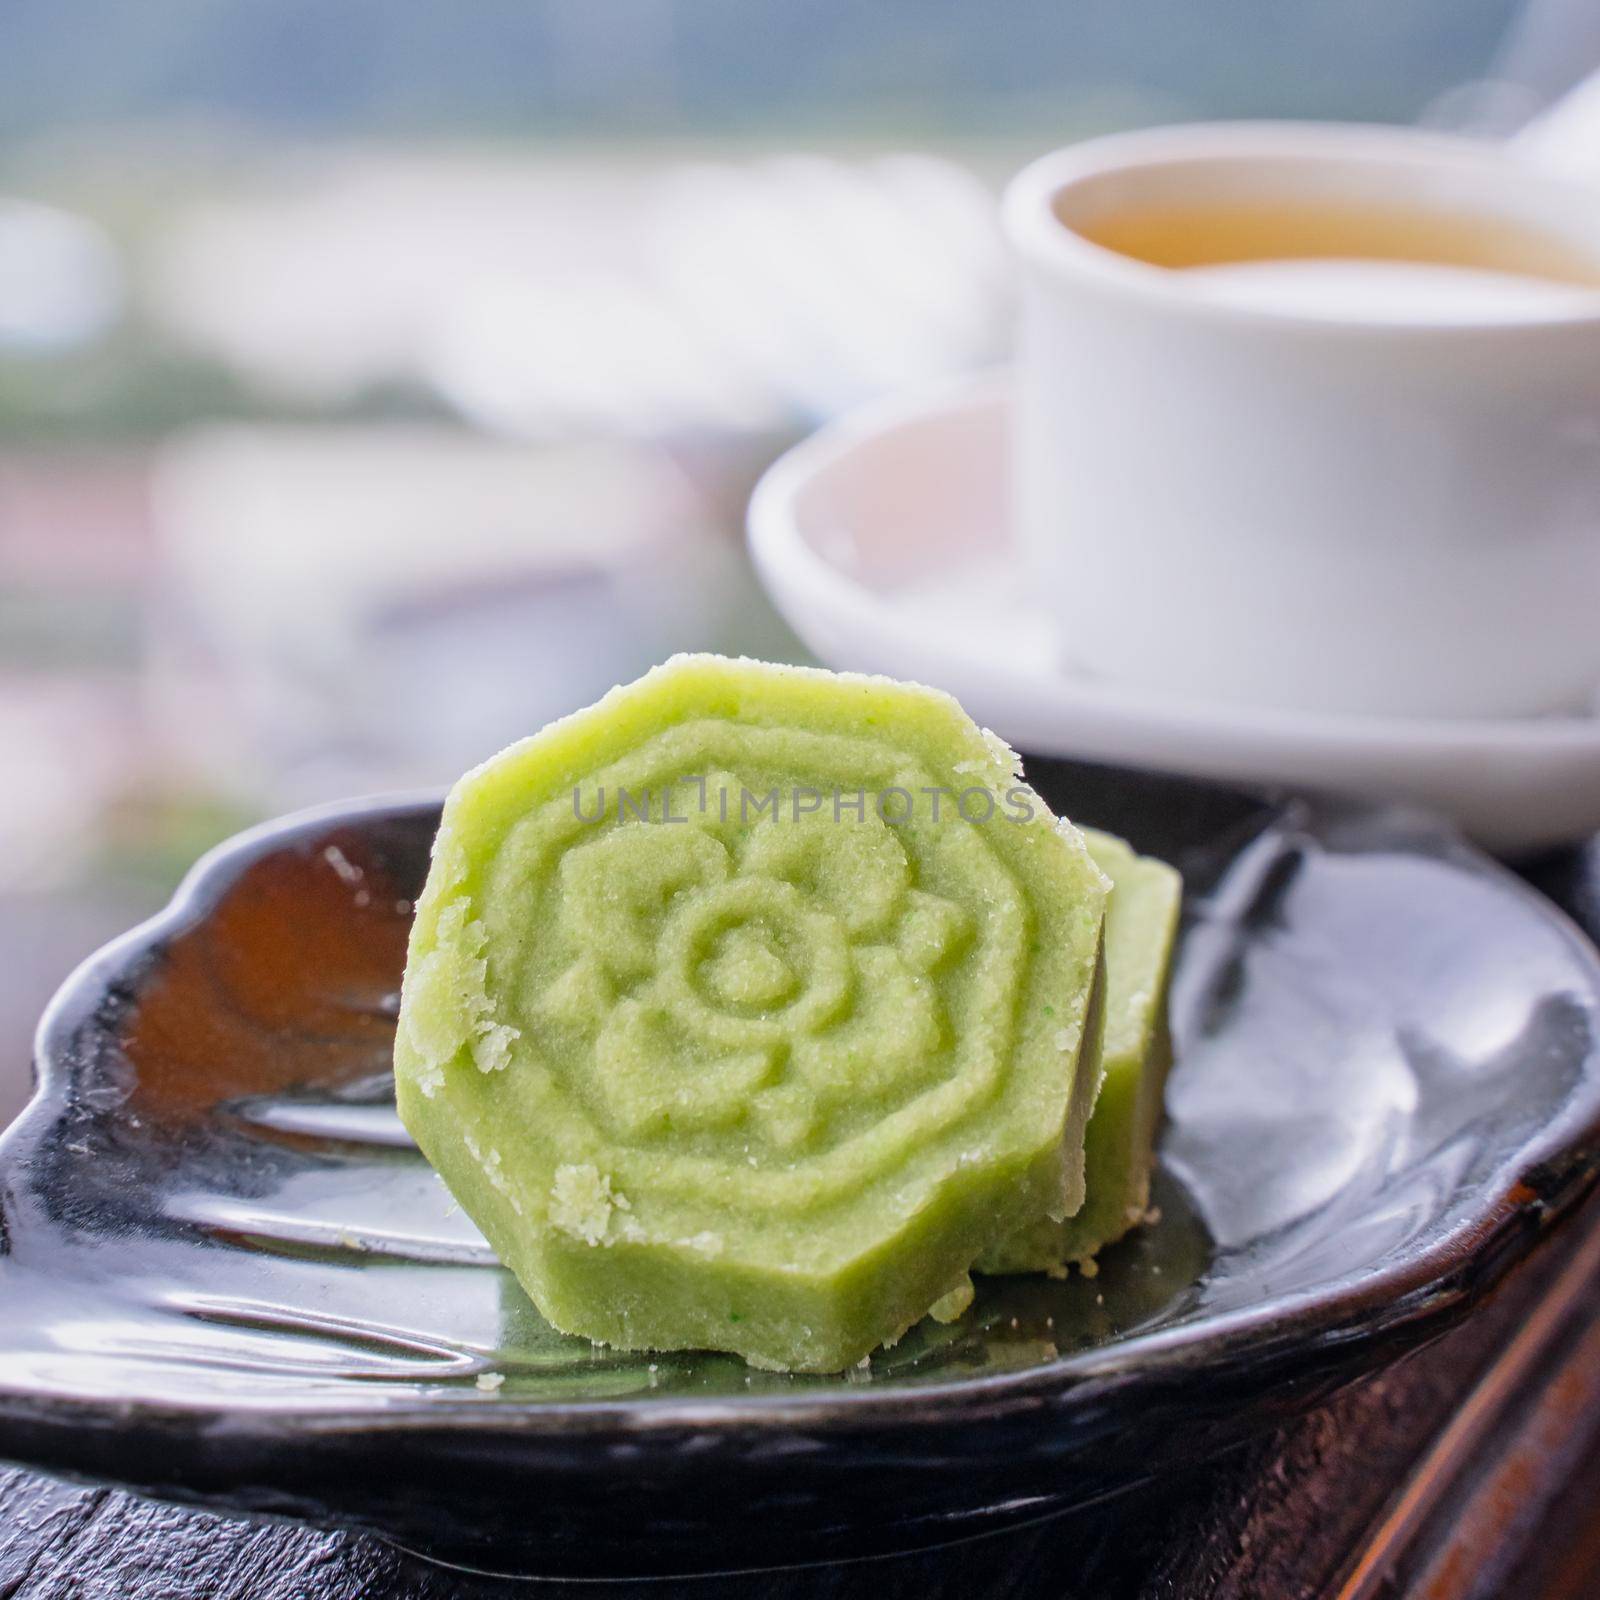 Delicious green mung bean cake with black tea plate on wooden railing of a teahouse in Taiwan with beautiful landscape in background, close up.